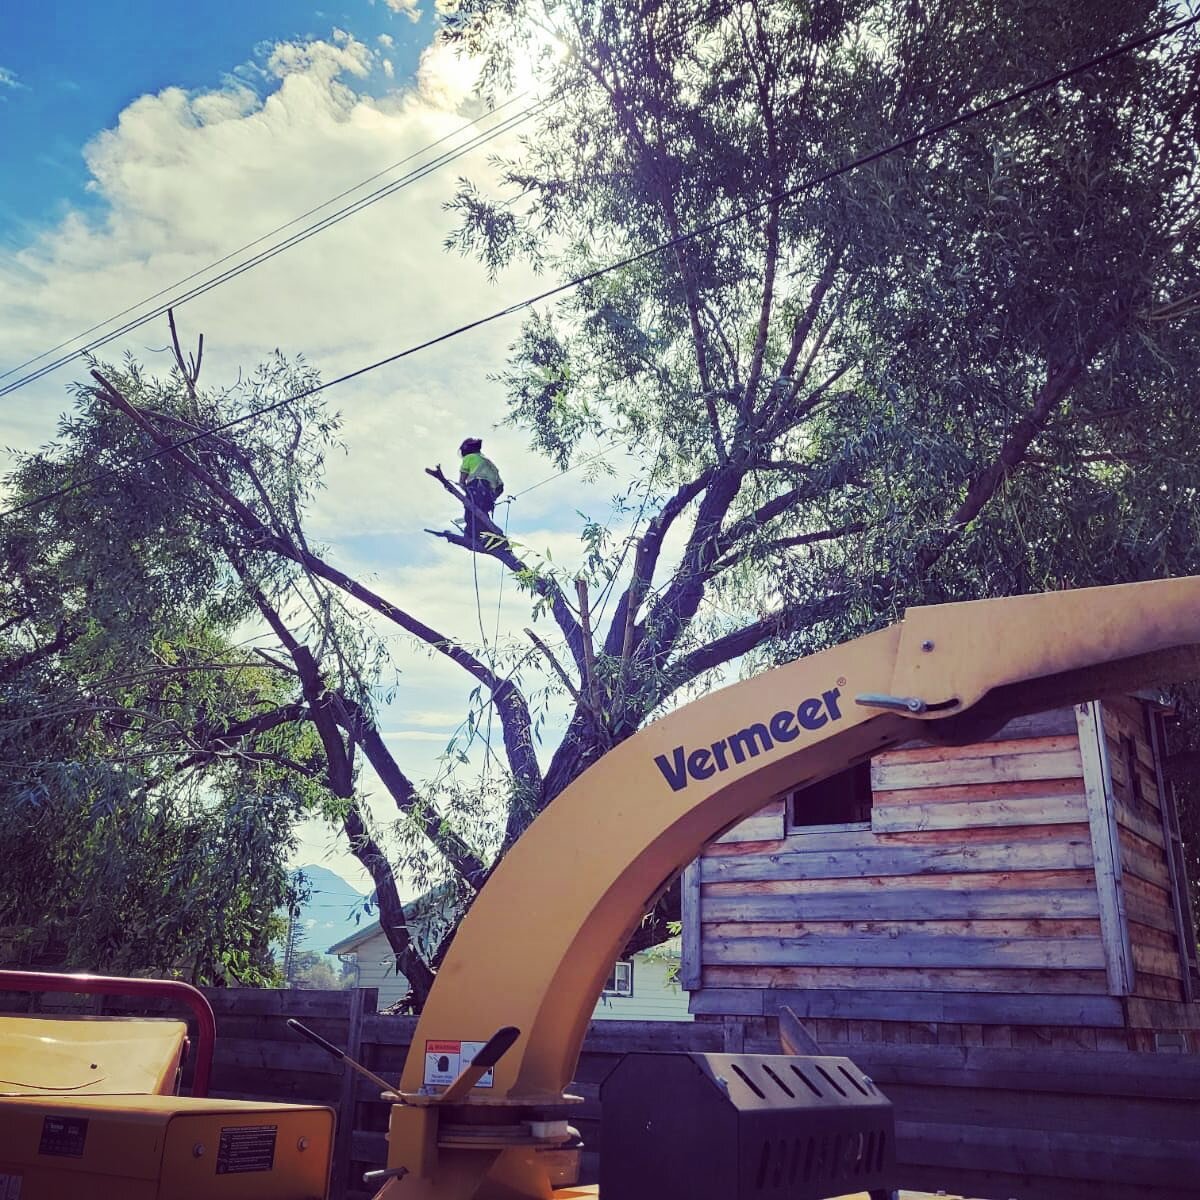 And just like that 💨 September is upon us! It&rsquo;s been in a long stretch of hot and dry weather this summer and the trees and our crews will most definitely appreciate some cool damp fall weather! 

With fall historically being our busiest time 